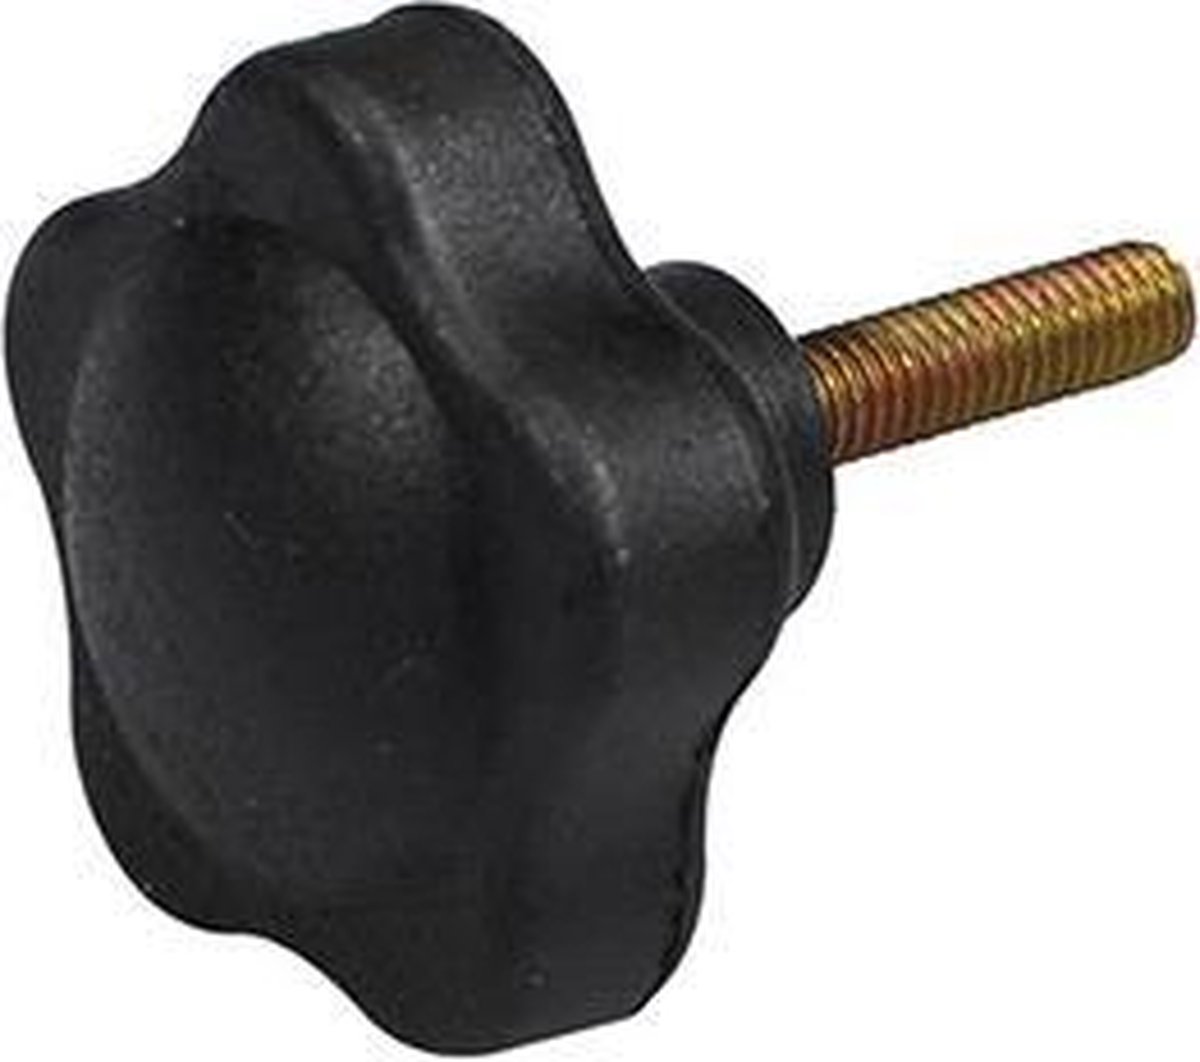 spare bolt for music stand, M6 with nylon head, length 25mm, for shaft height adjustment